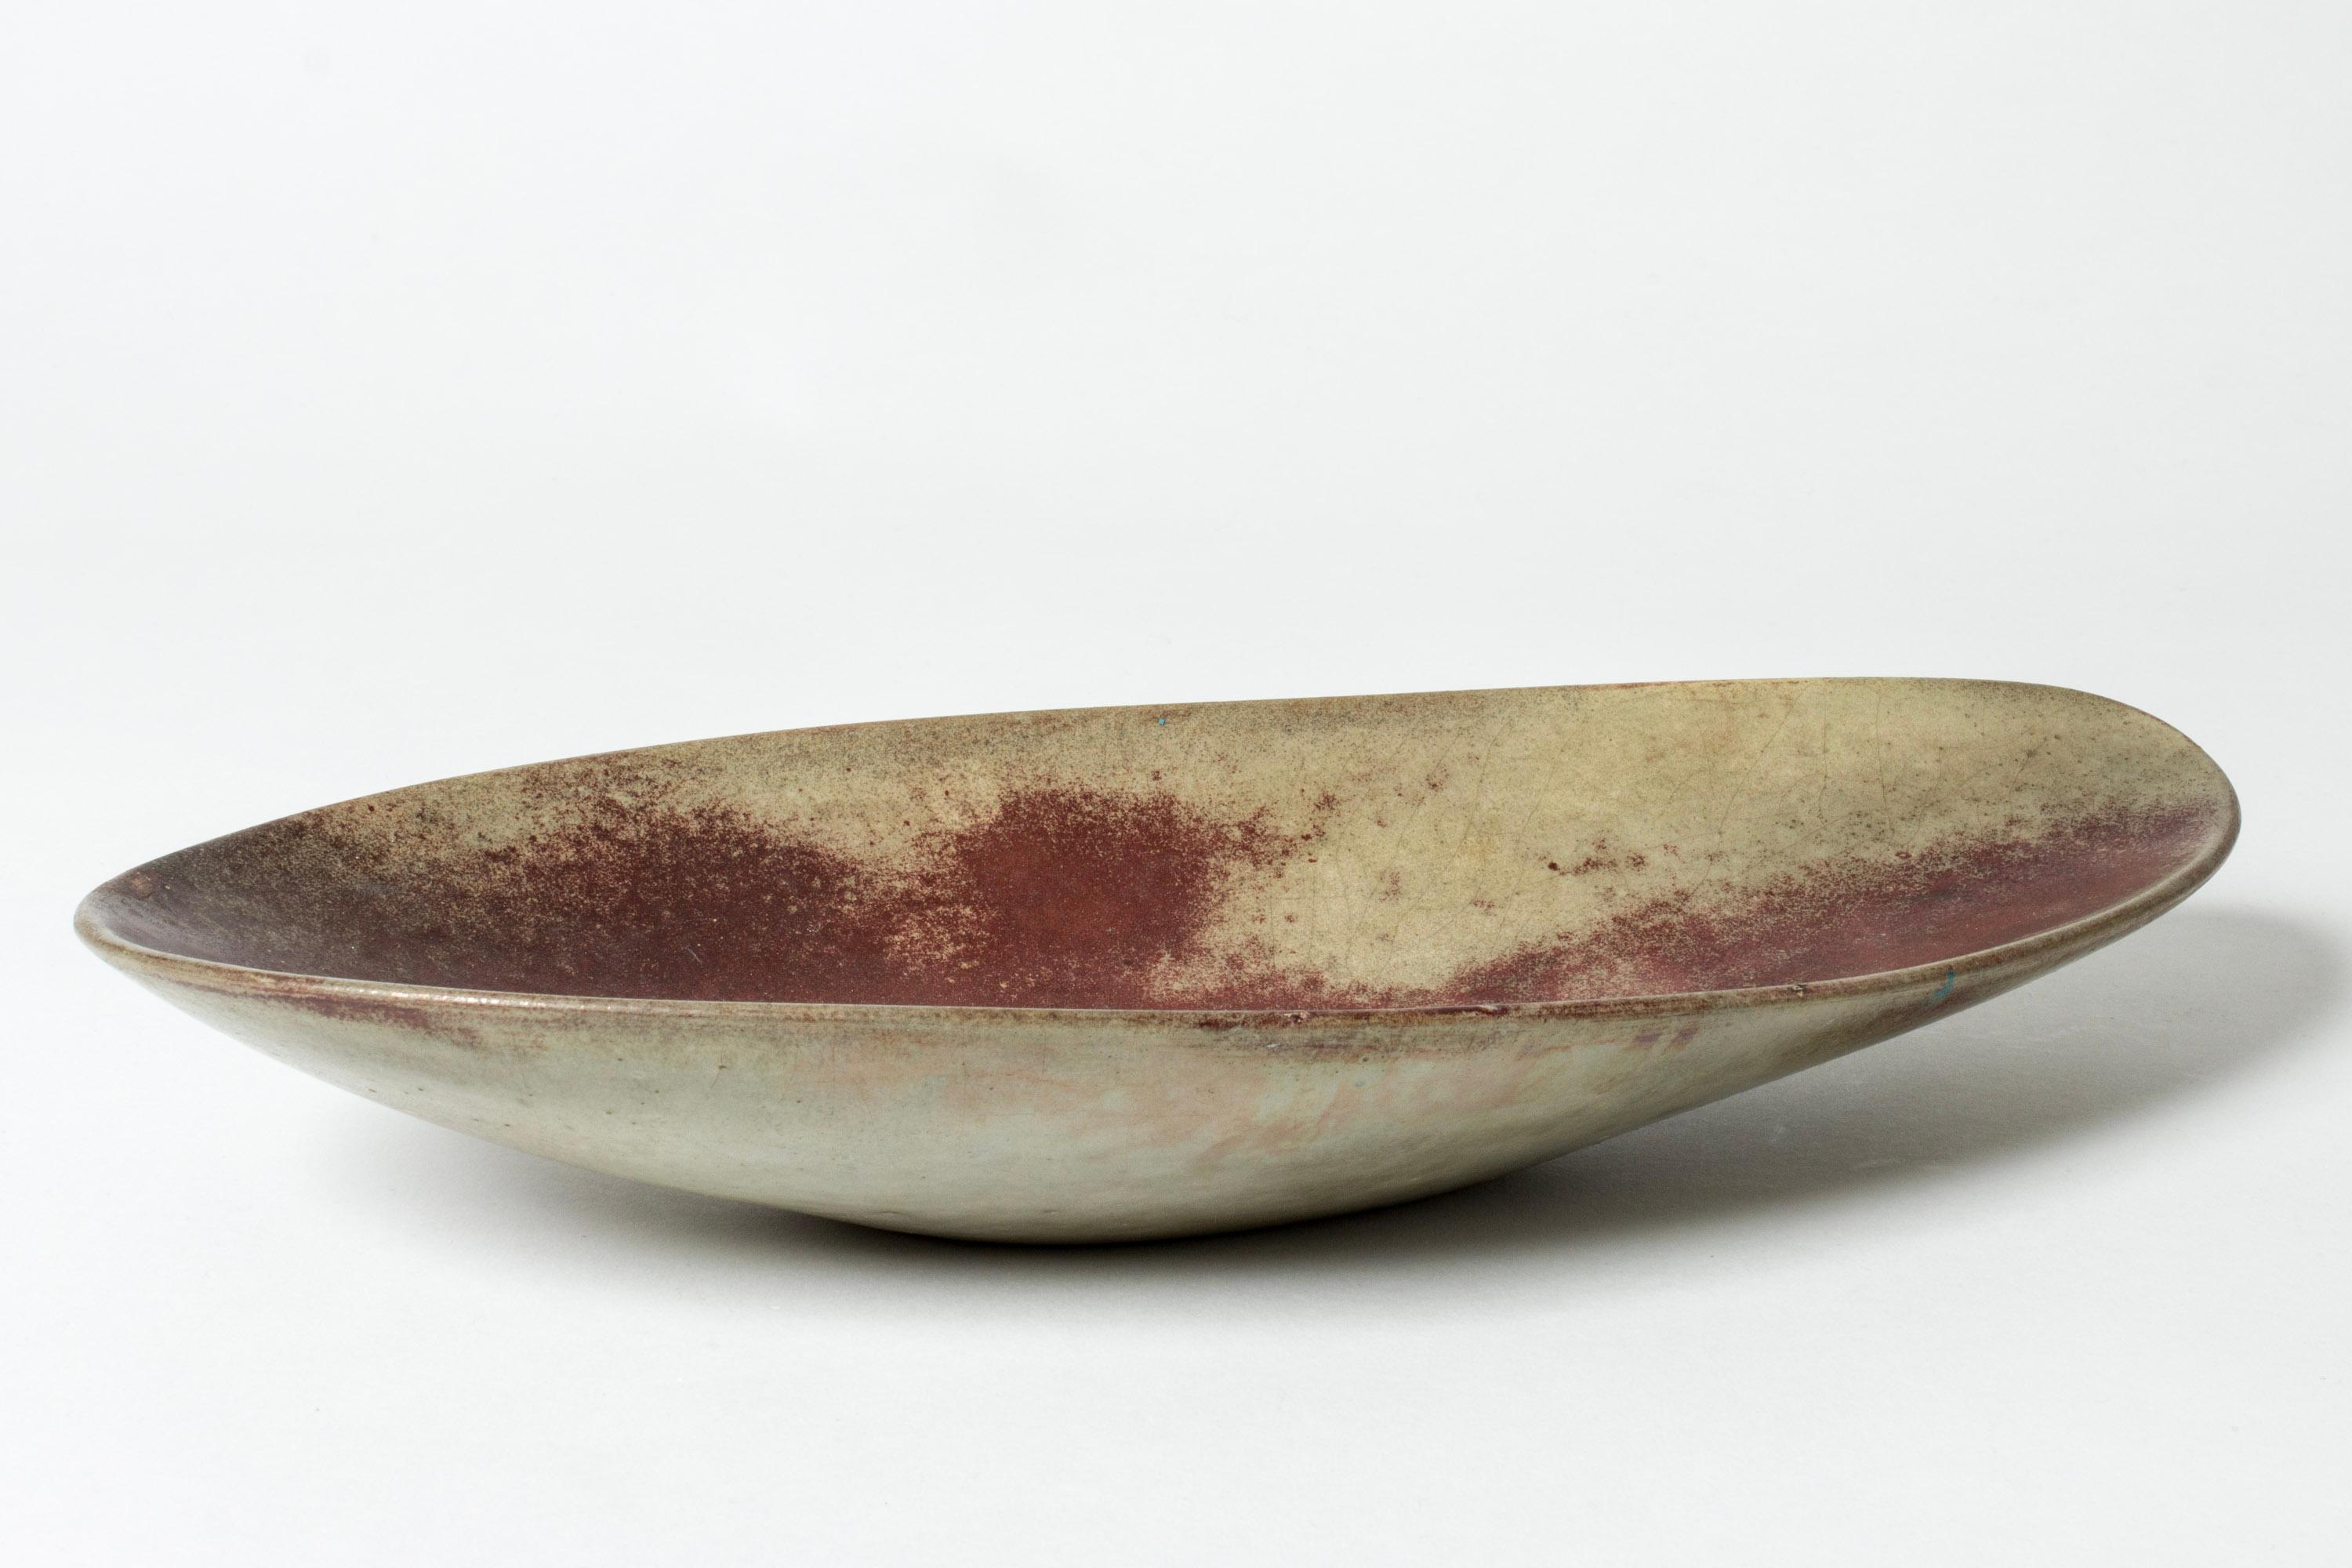 Platter by Hans Hedberg, made in faience. Smooth, organic form with striking oxblood glaze on a grey background.